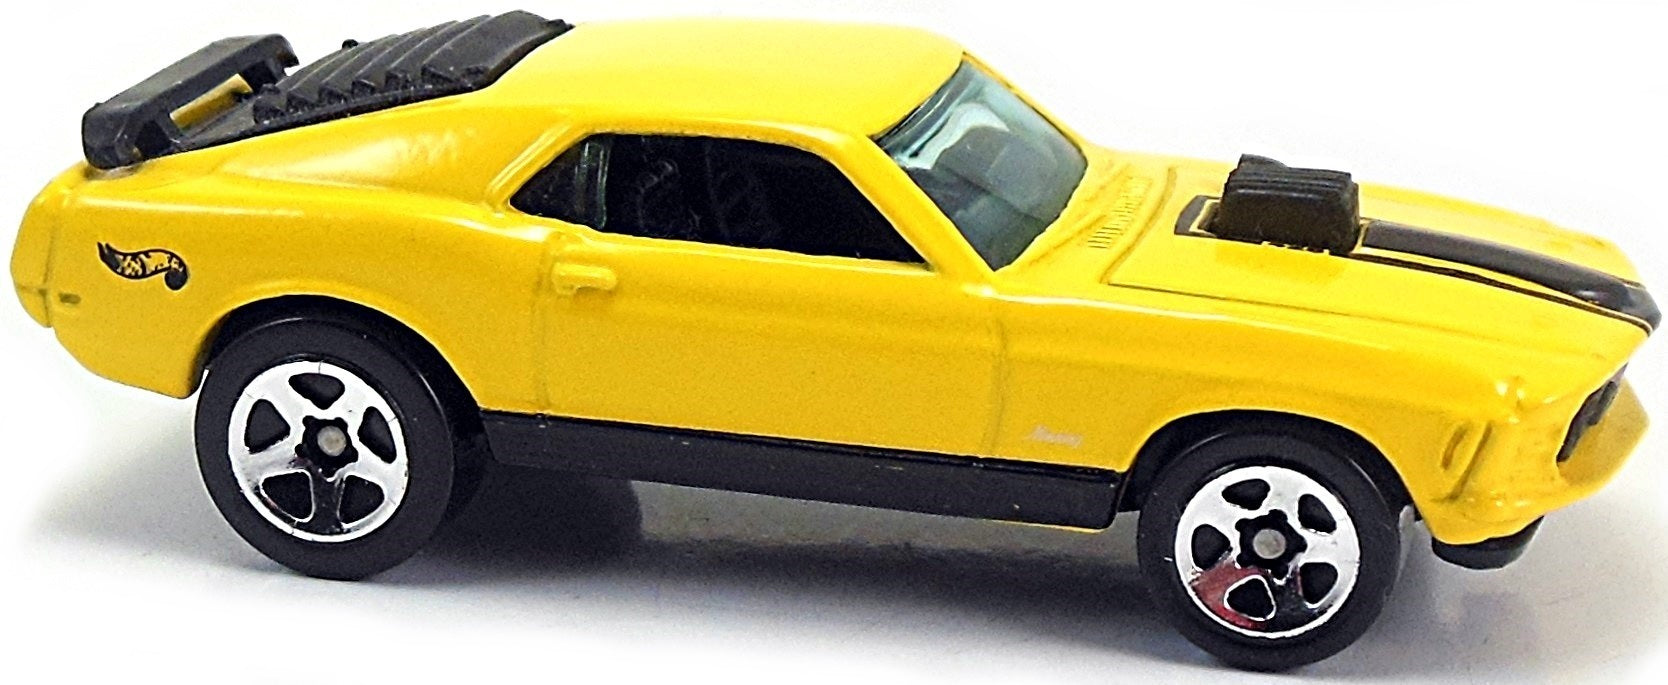 Hot Wheels 1998 - Collector # 670 - First Editions 29/40 - Mustang Mach 1 -  Yellow - 5 Spokes - USA Blue Car Card